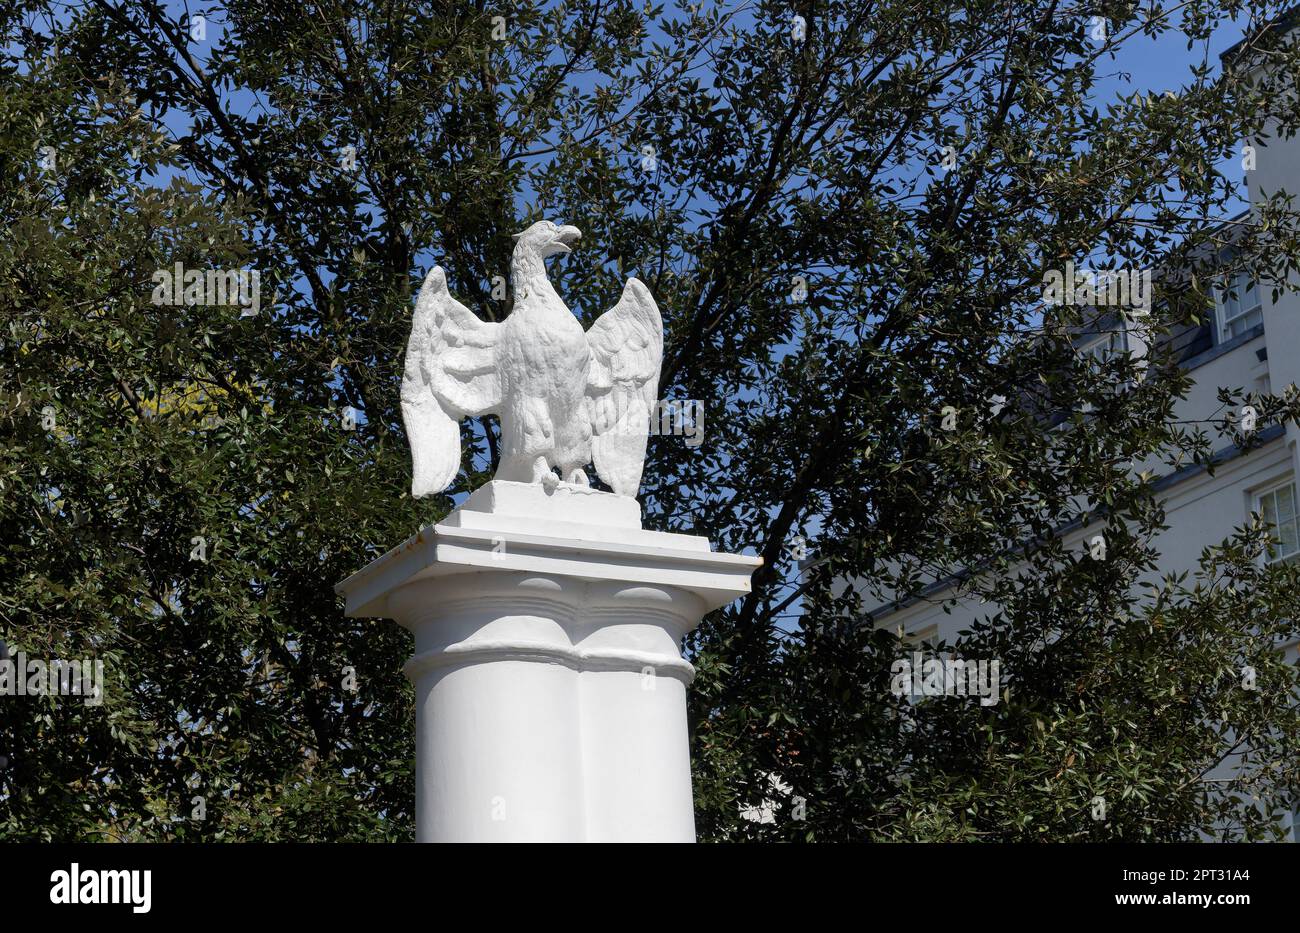 Statue of an phoenix with wings out on white stone column in Orme Square Bayswater London England with trees in background Stock Photo